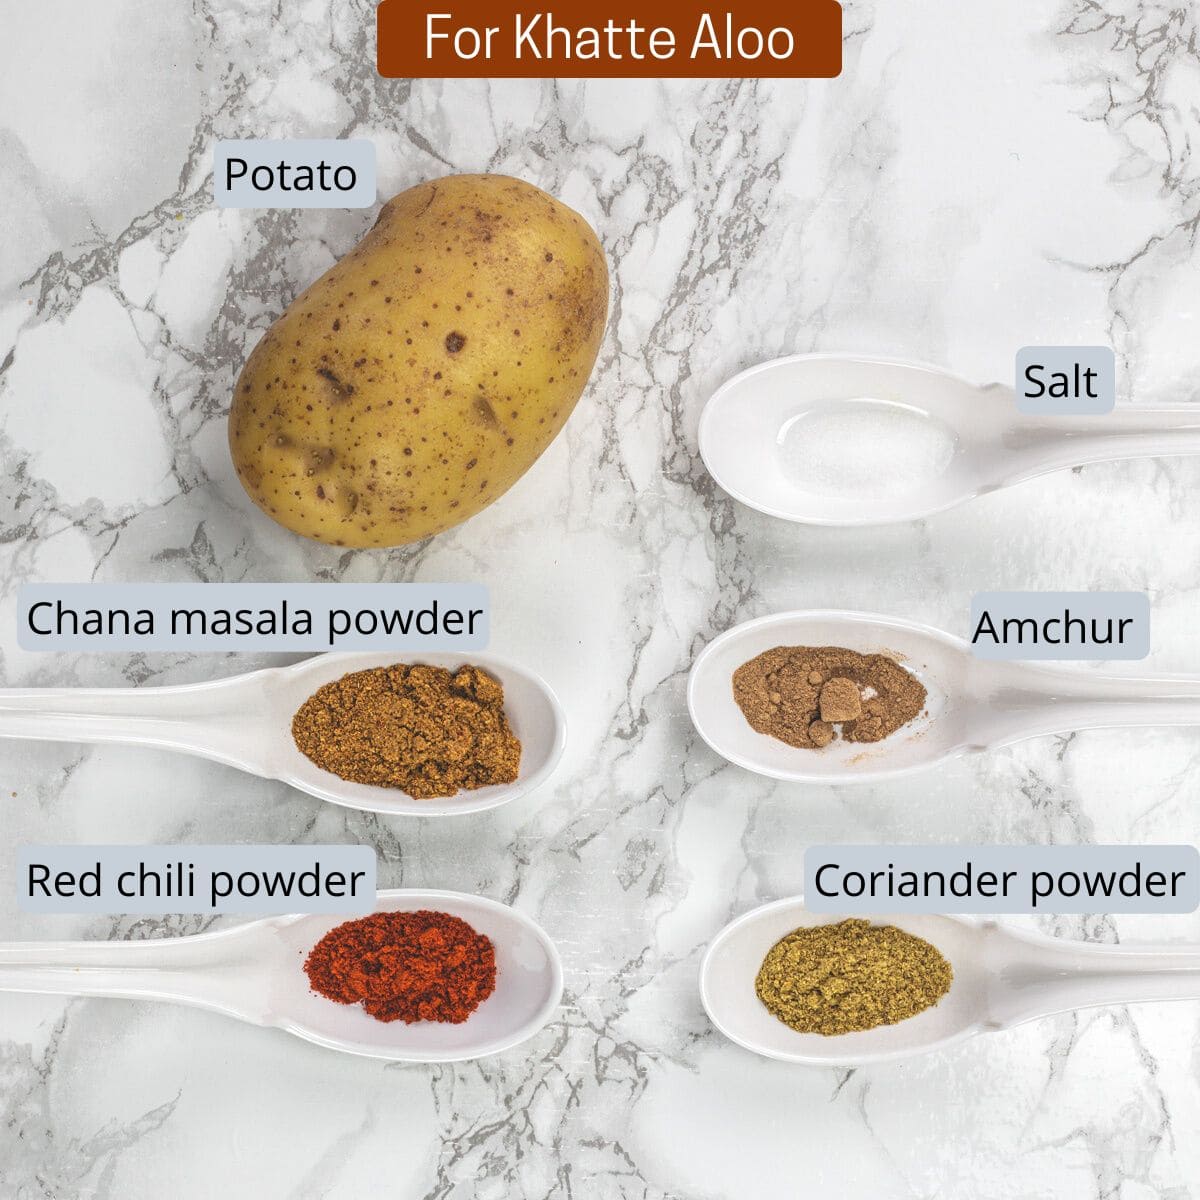 Khatte aloo ingredients in spoons with label.